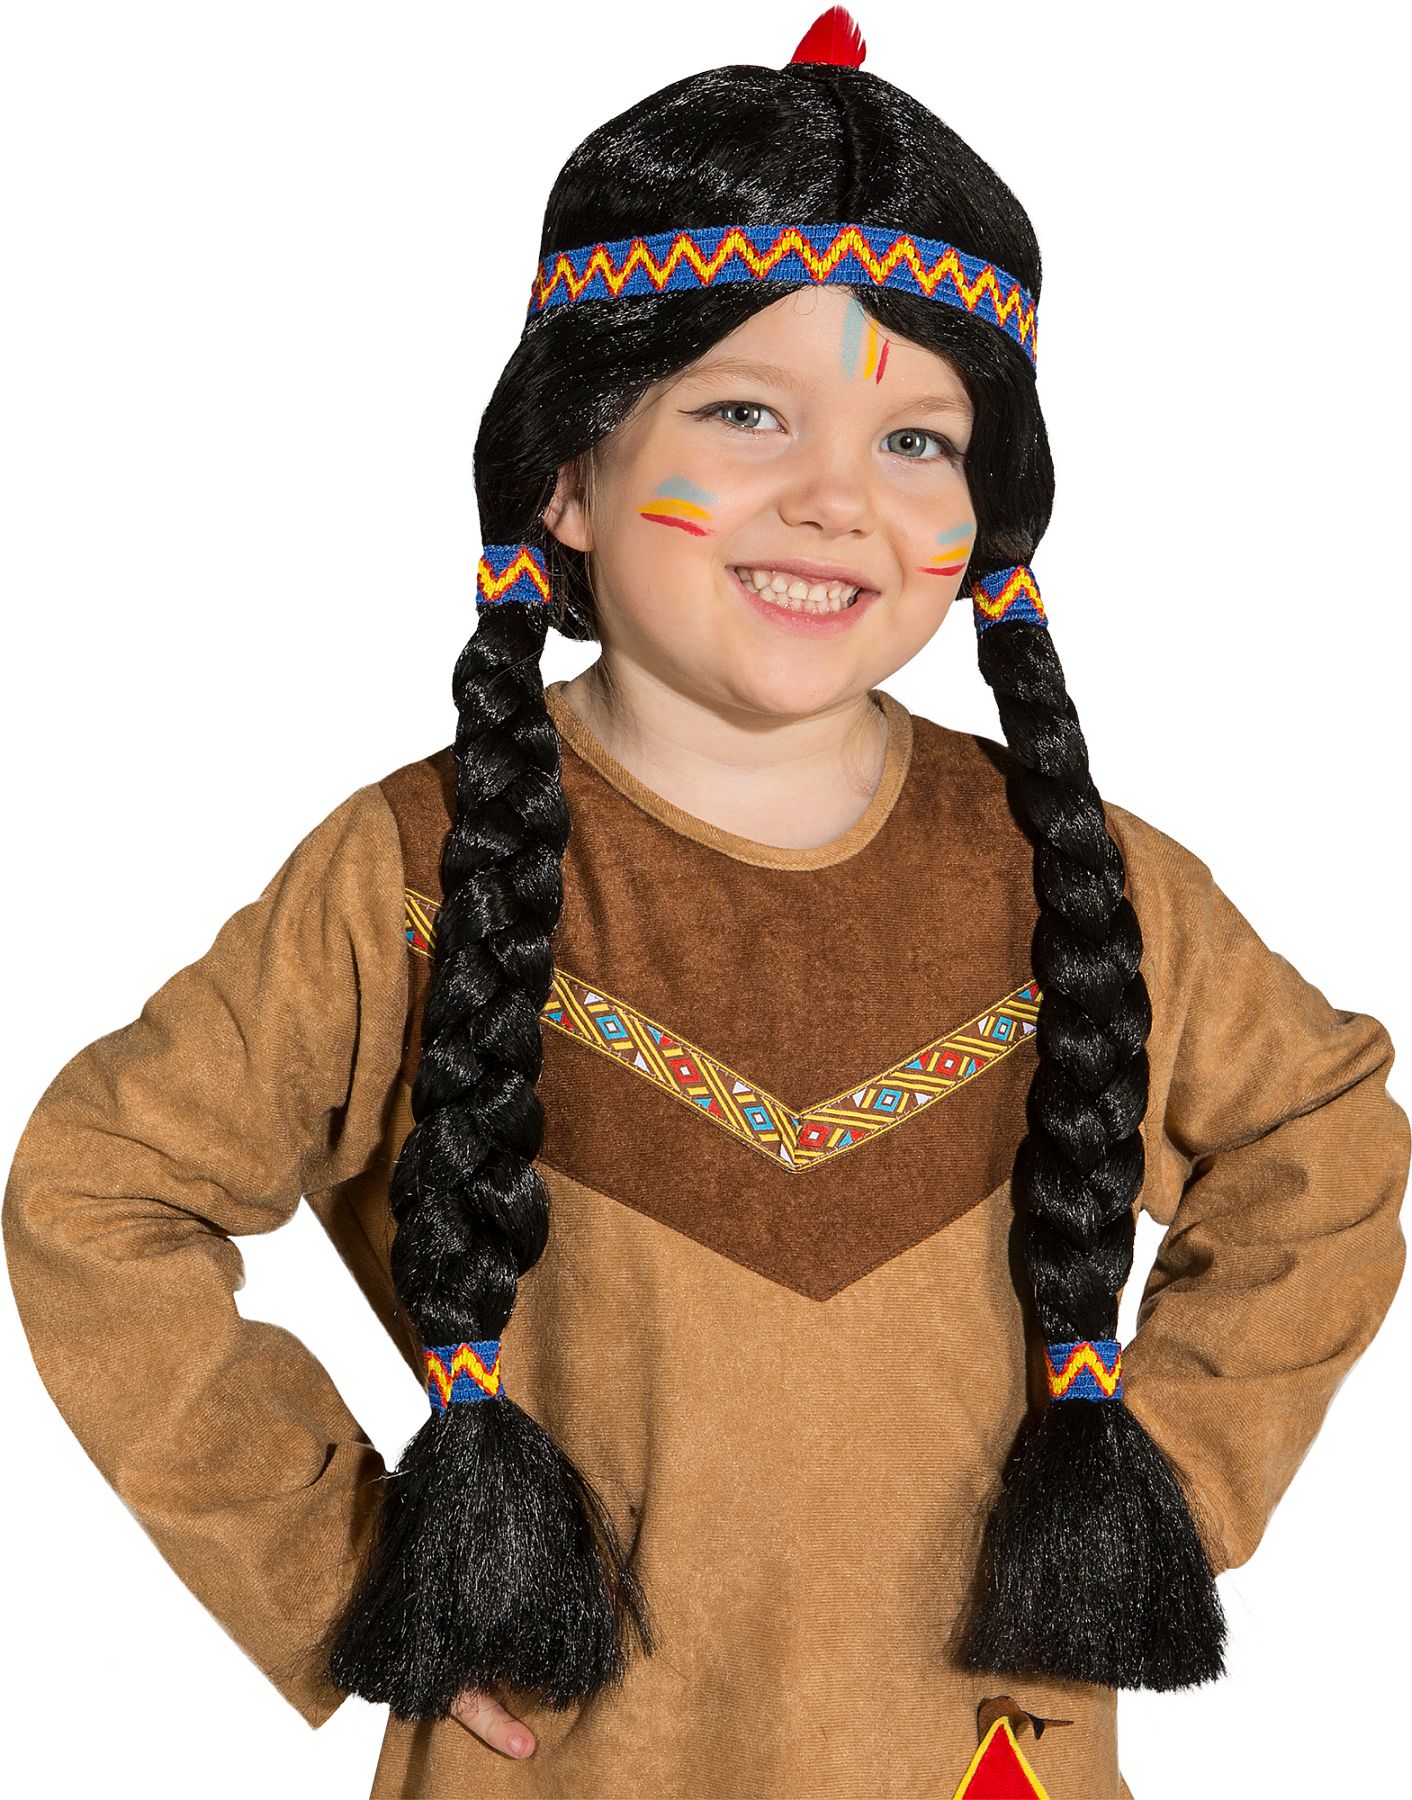 Braided Indian Girl wig with plaint for children's